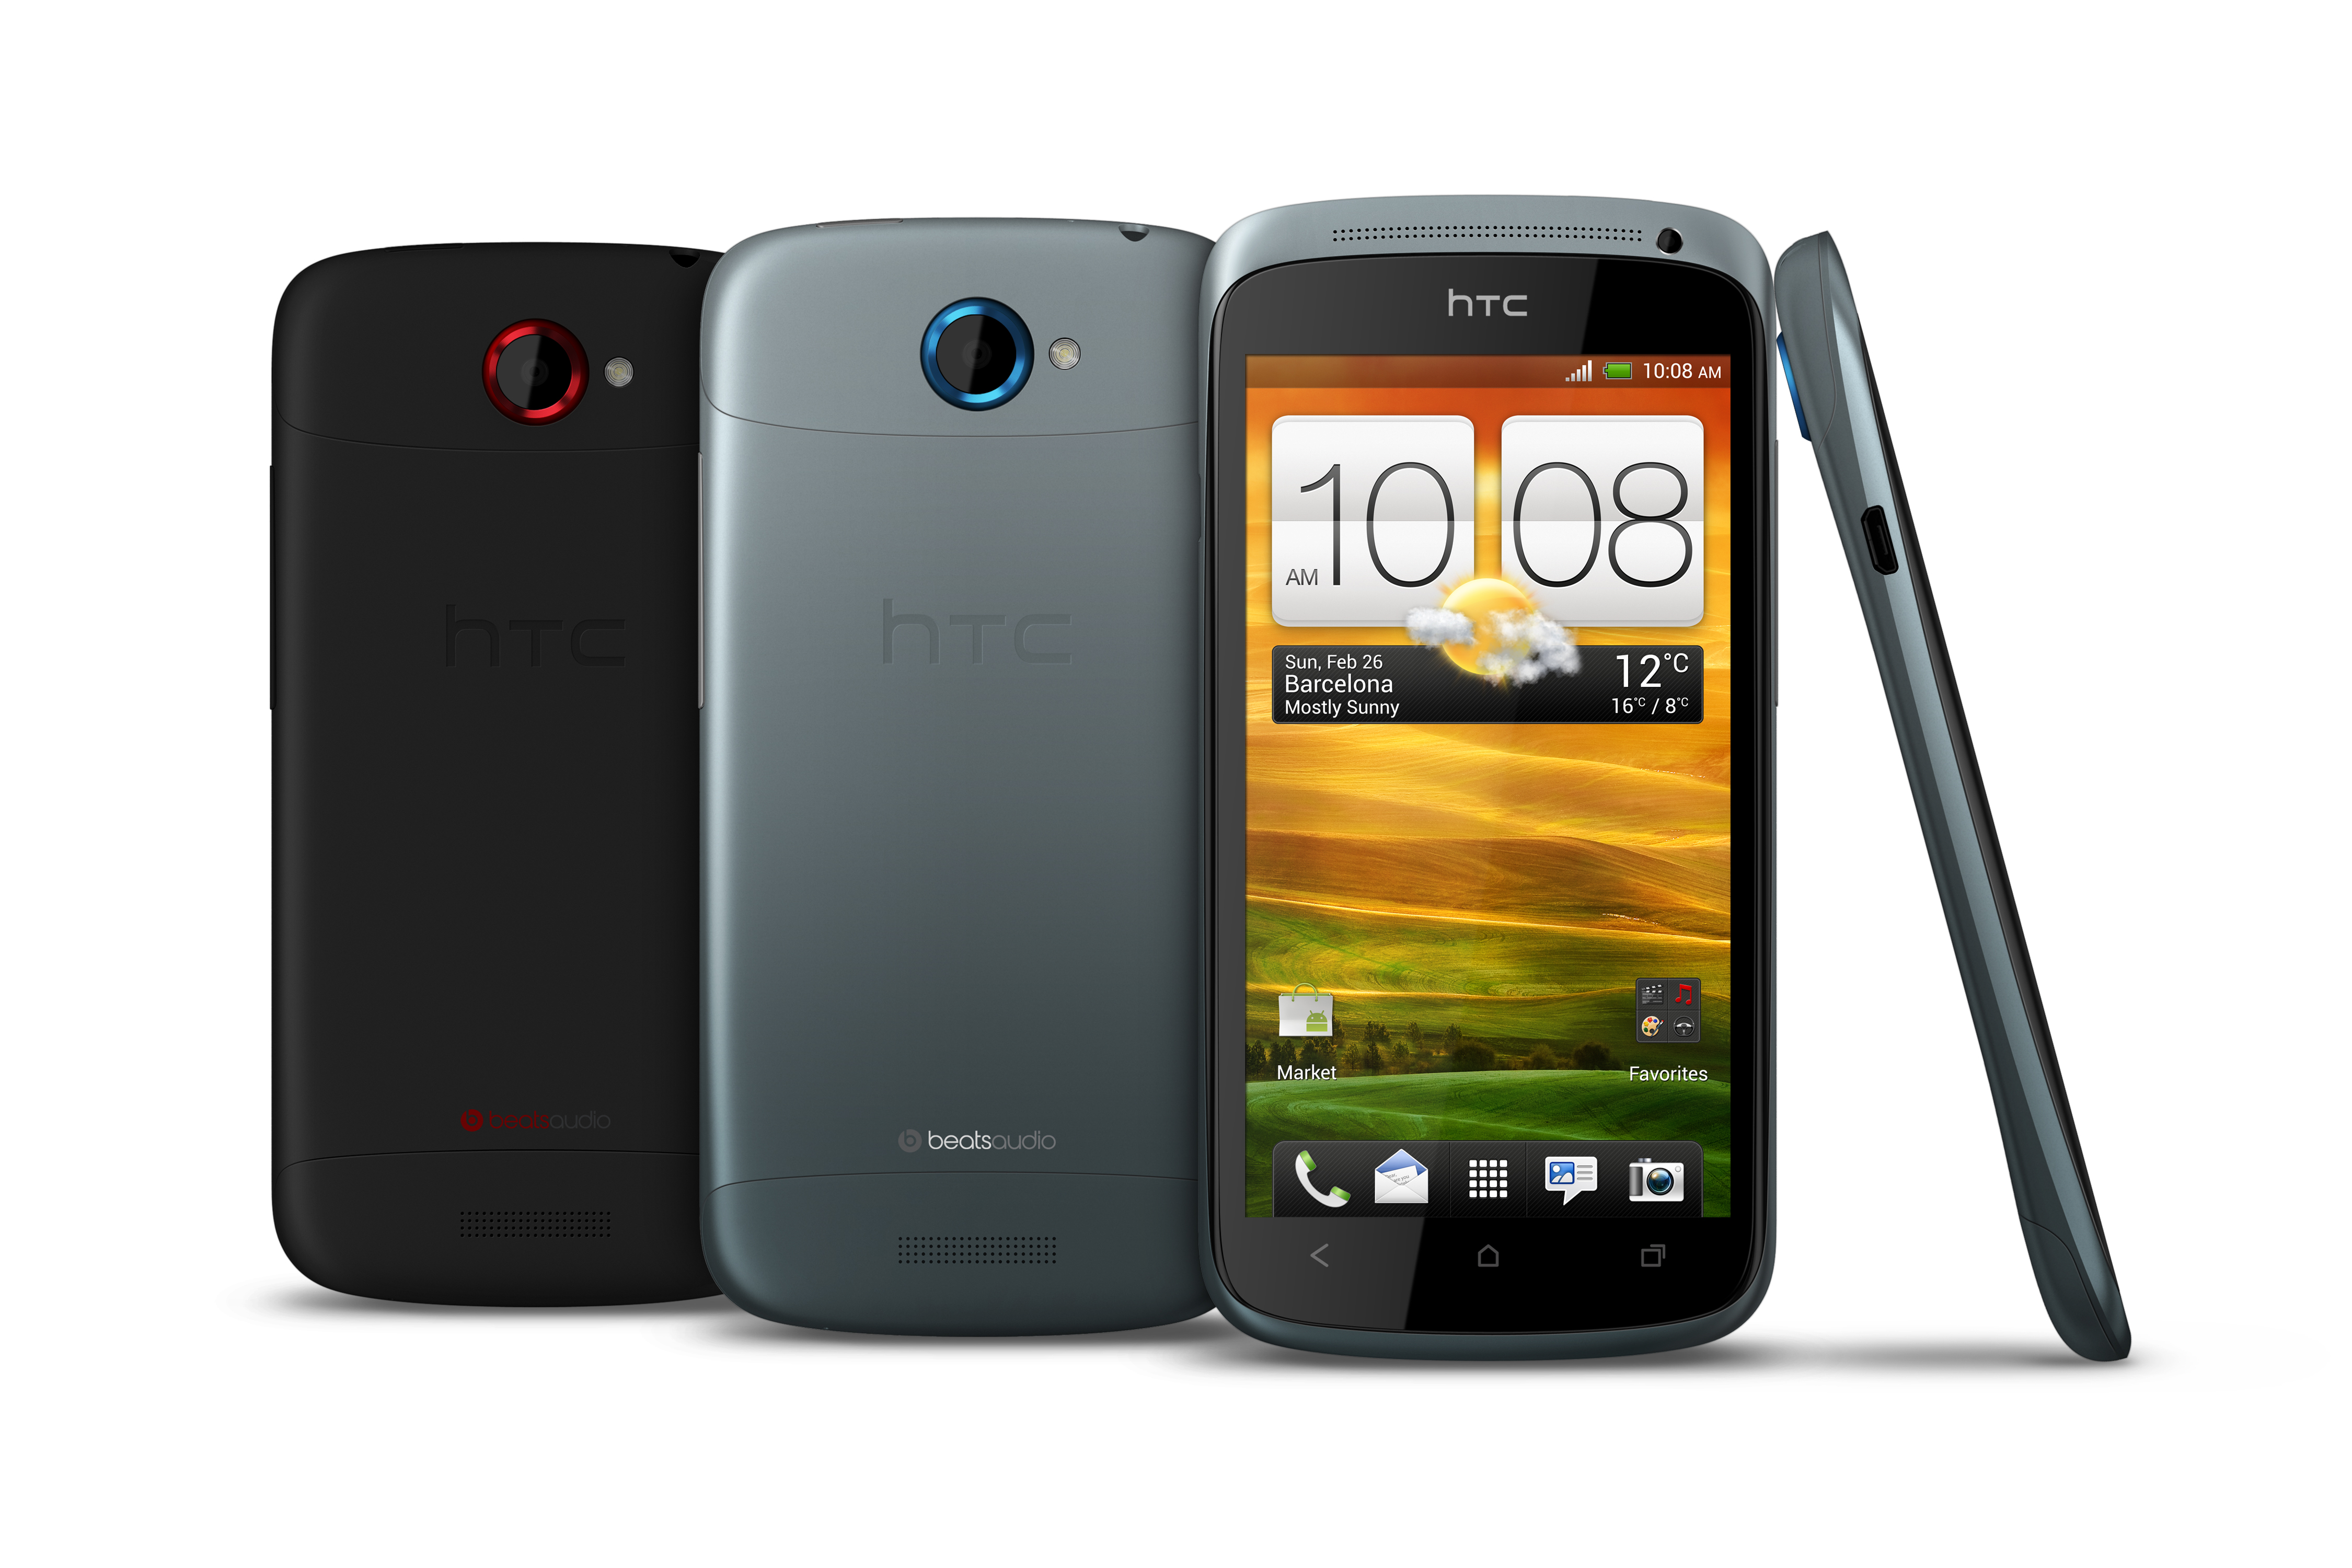 htc-s-new-strategy-the-htc-one